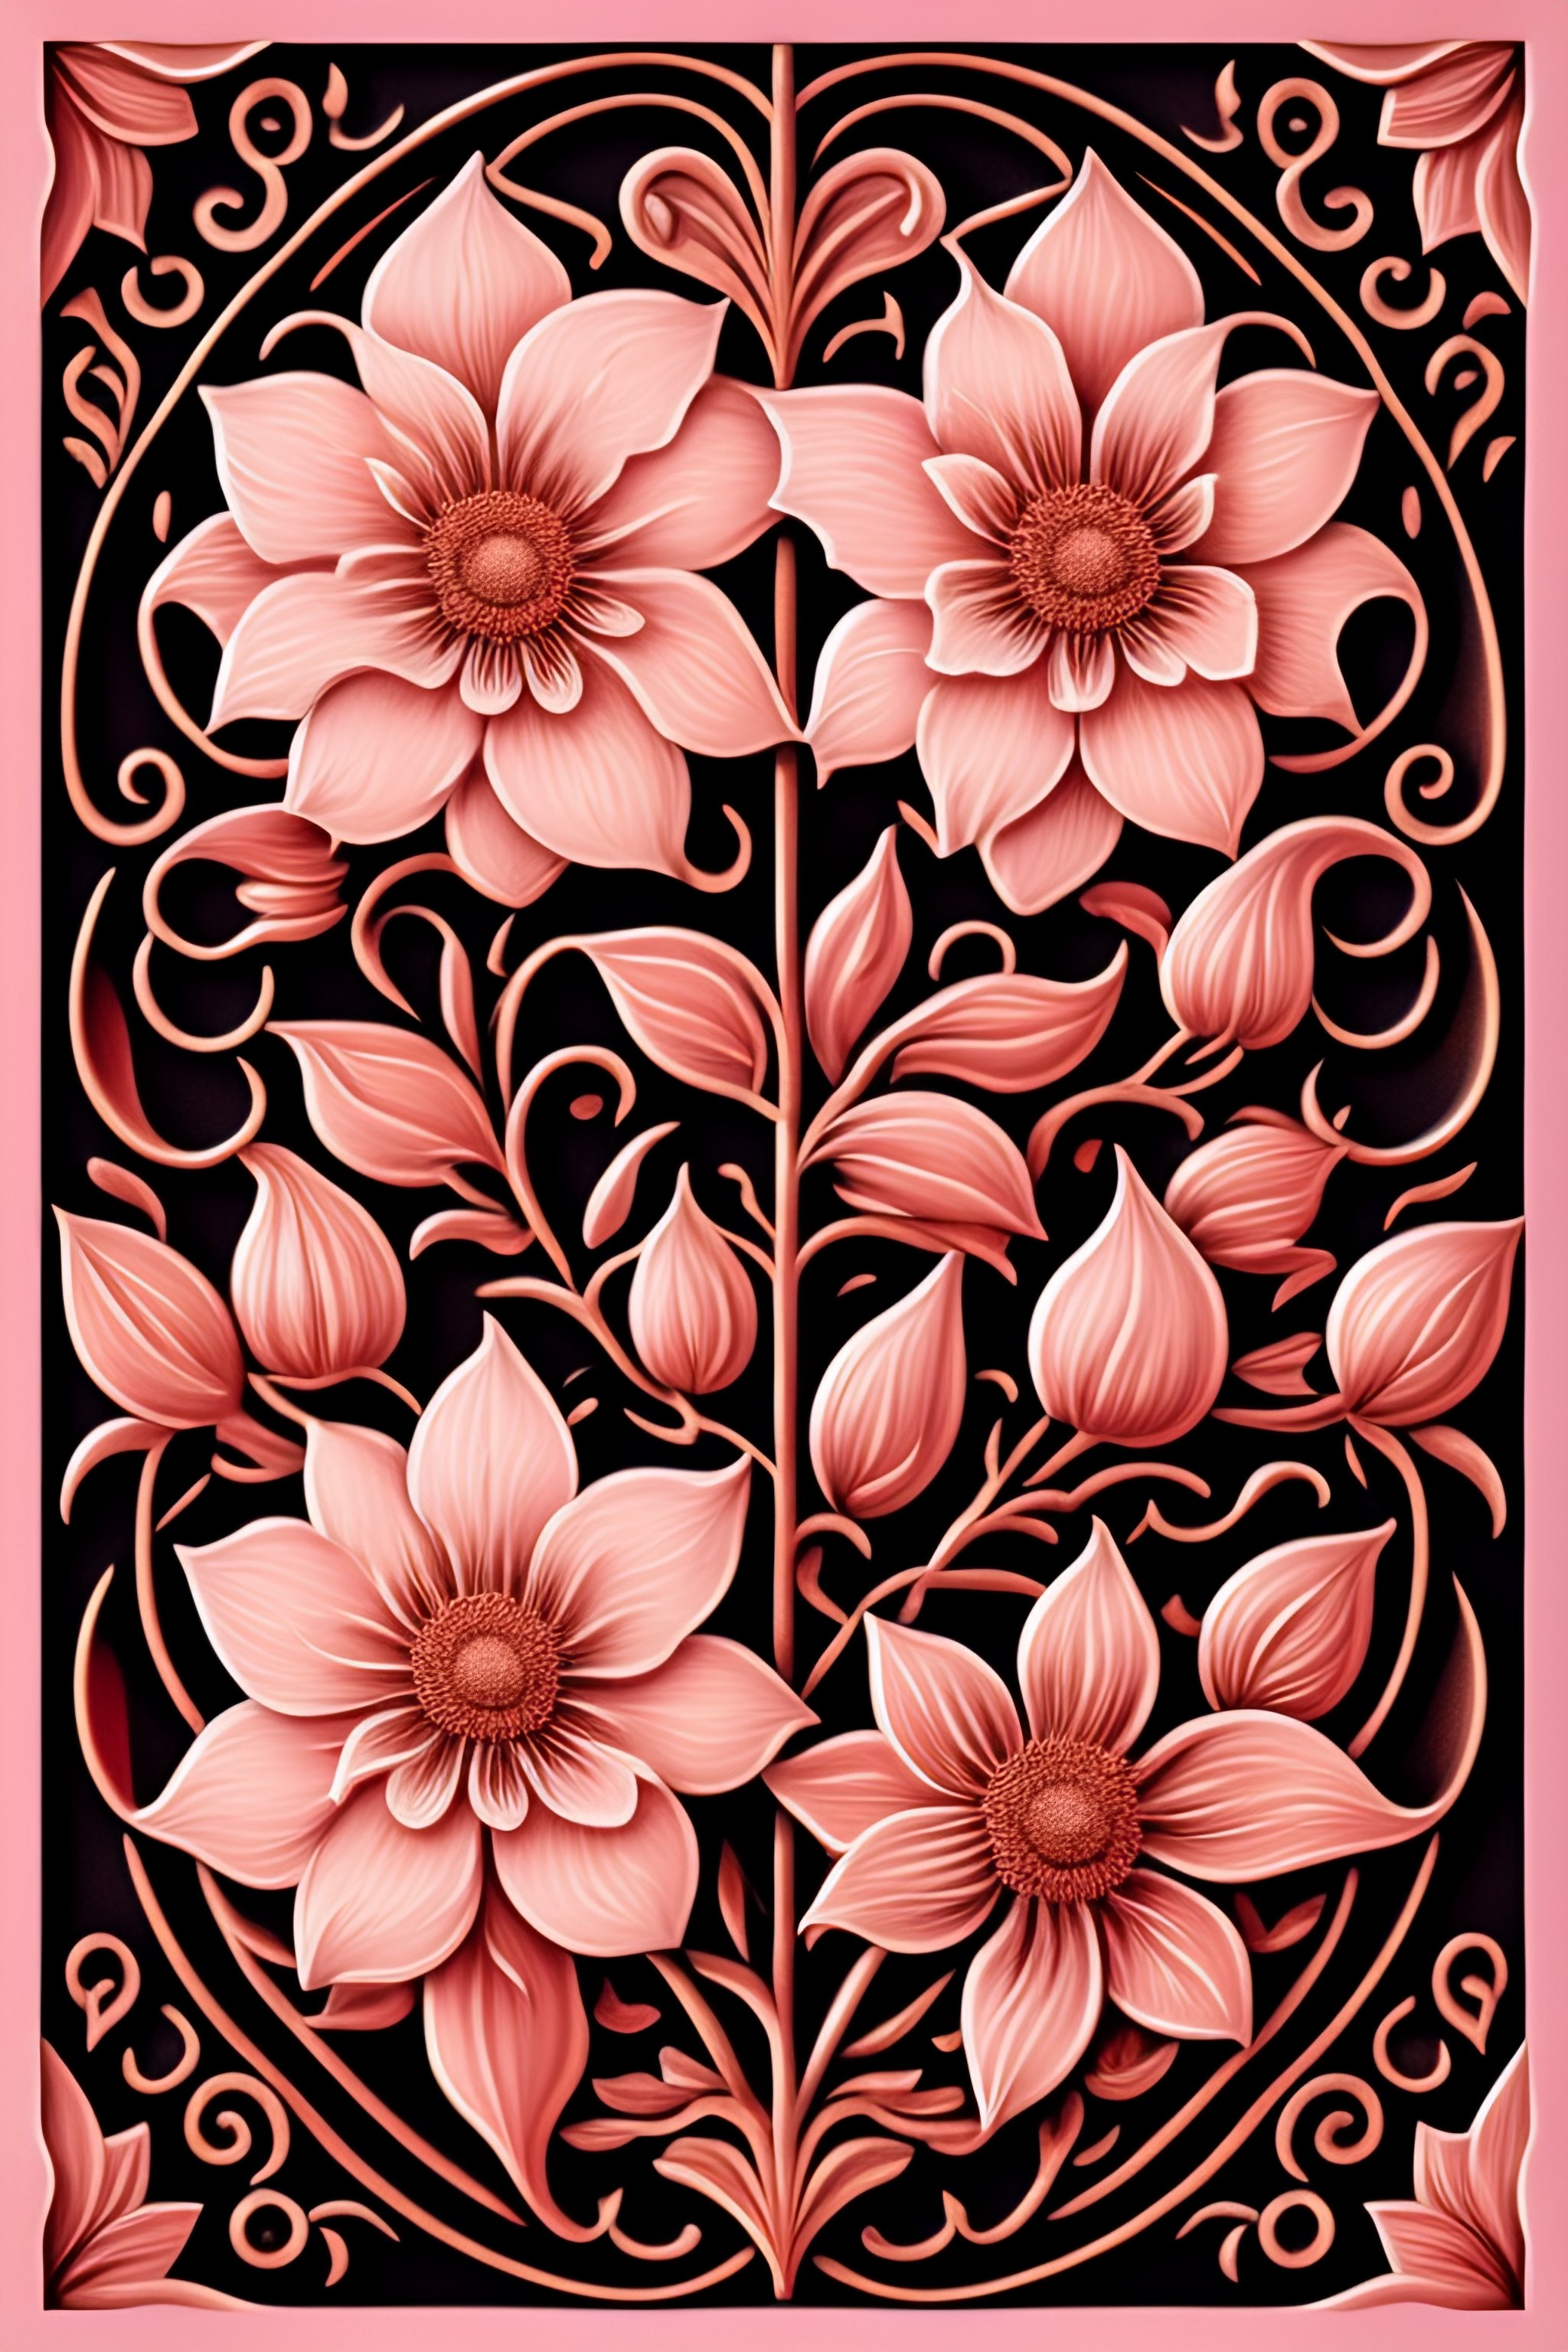 Lexica Classical Floral Elements Emanating From Center Woodcutting